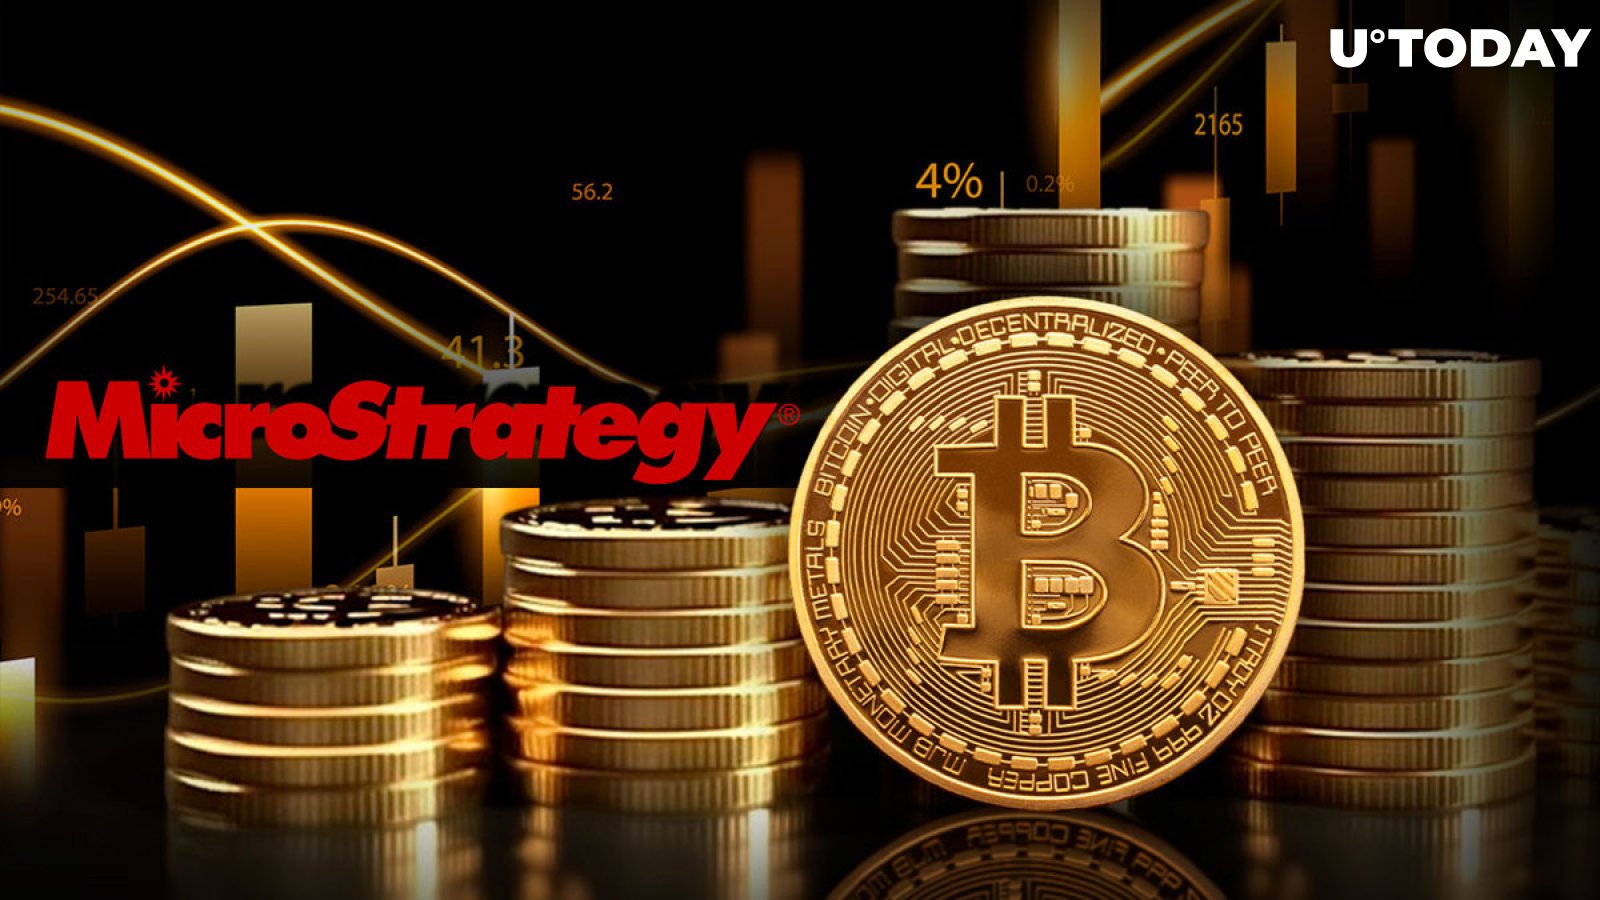 MicroStrategy surpasses BlackRock with a new purchase of 12,000 BTC at a Bitcoin price of $72,000